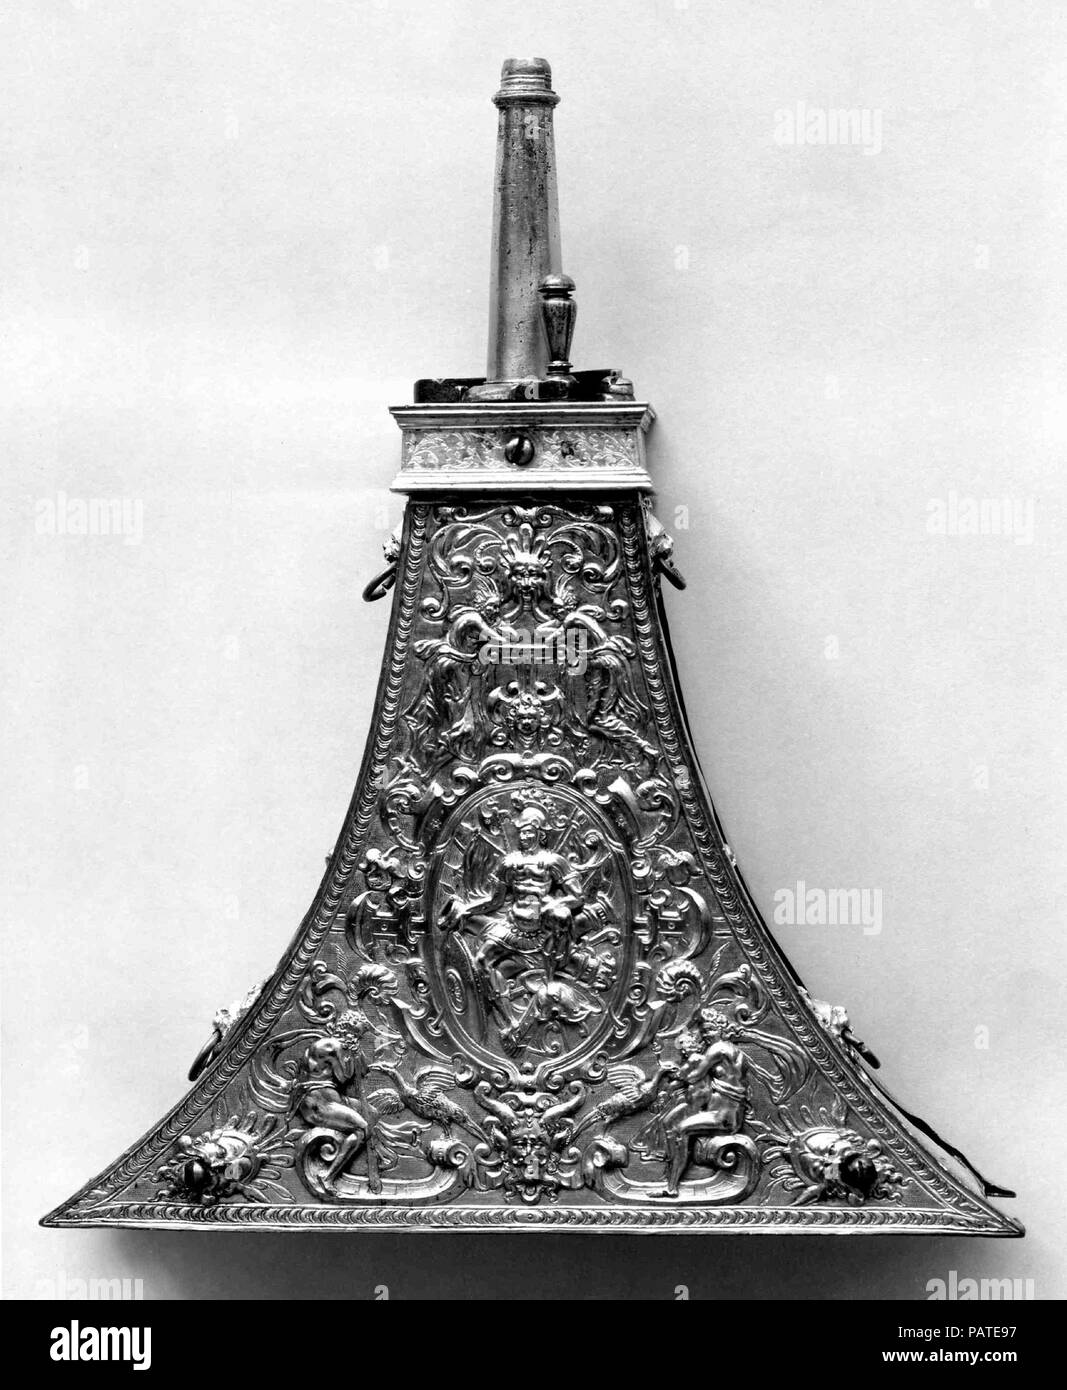 Powder Flask. Culture: French or Flemish. Dimensions: H. 11 1/8 in. (28.4 cm); W. 8 1/2 in. (21.6 cm). Date: ca. 1560-80.  The decoration of the front panel combines motifs from French and Flemish ornament prints. The figure in the central oval represents Mars or another personification of war. Museum: Metropolitan Museum of Art, New York, USA. Stock Photo